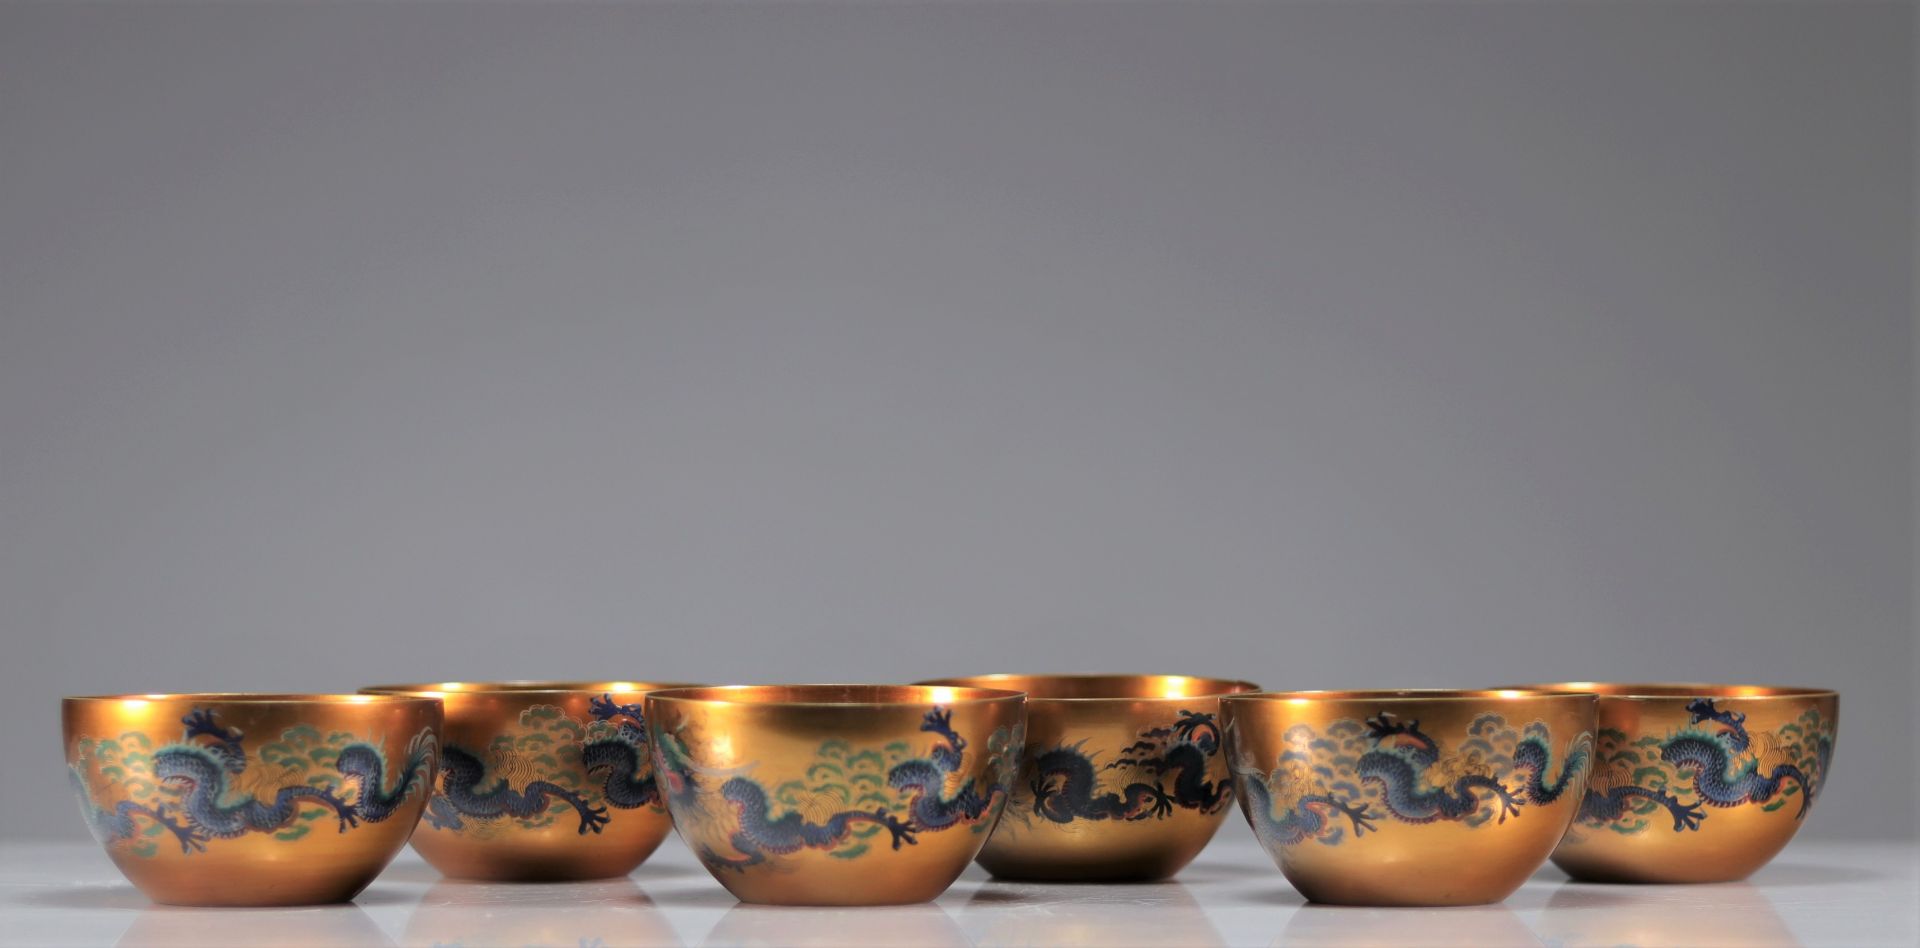 Lot of bowls (6) in Fuzhou lacquer decorated with dragons